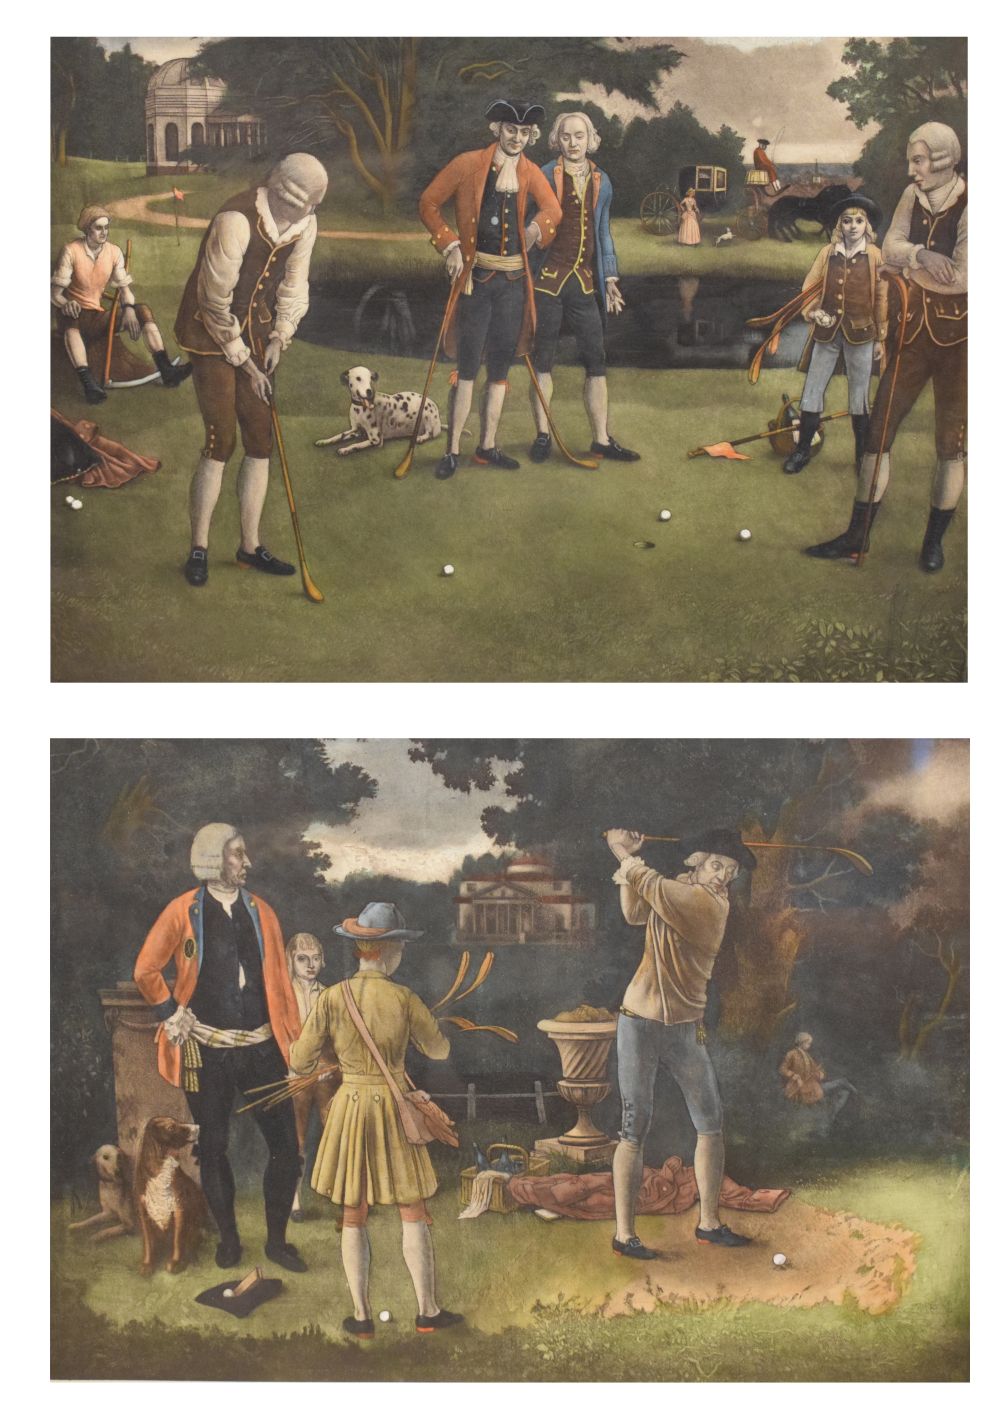 Lawrence Josset - Pair of coloured golfing prints 'The Practice Shot' and 'The Last Green', 31cm x